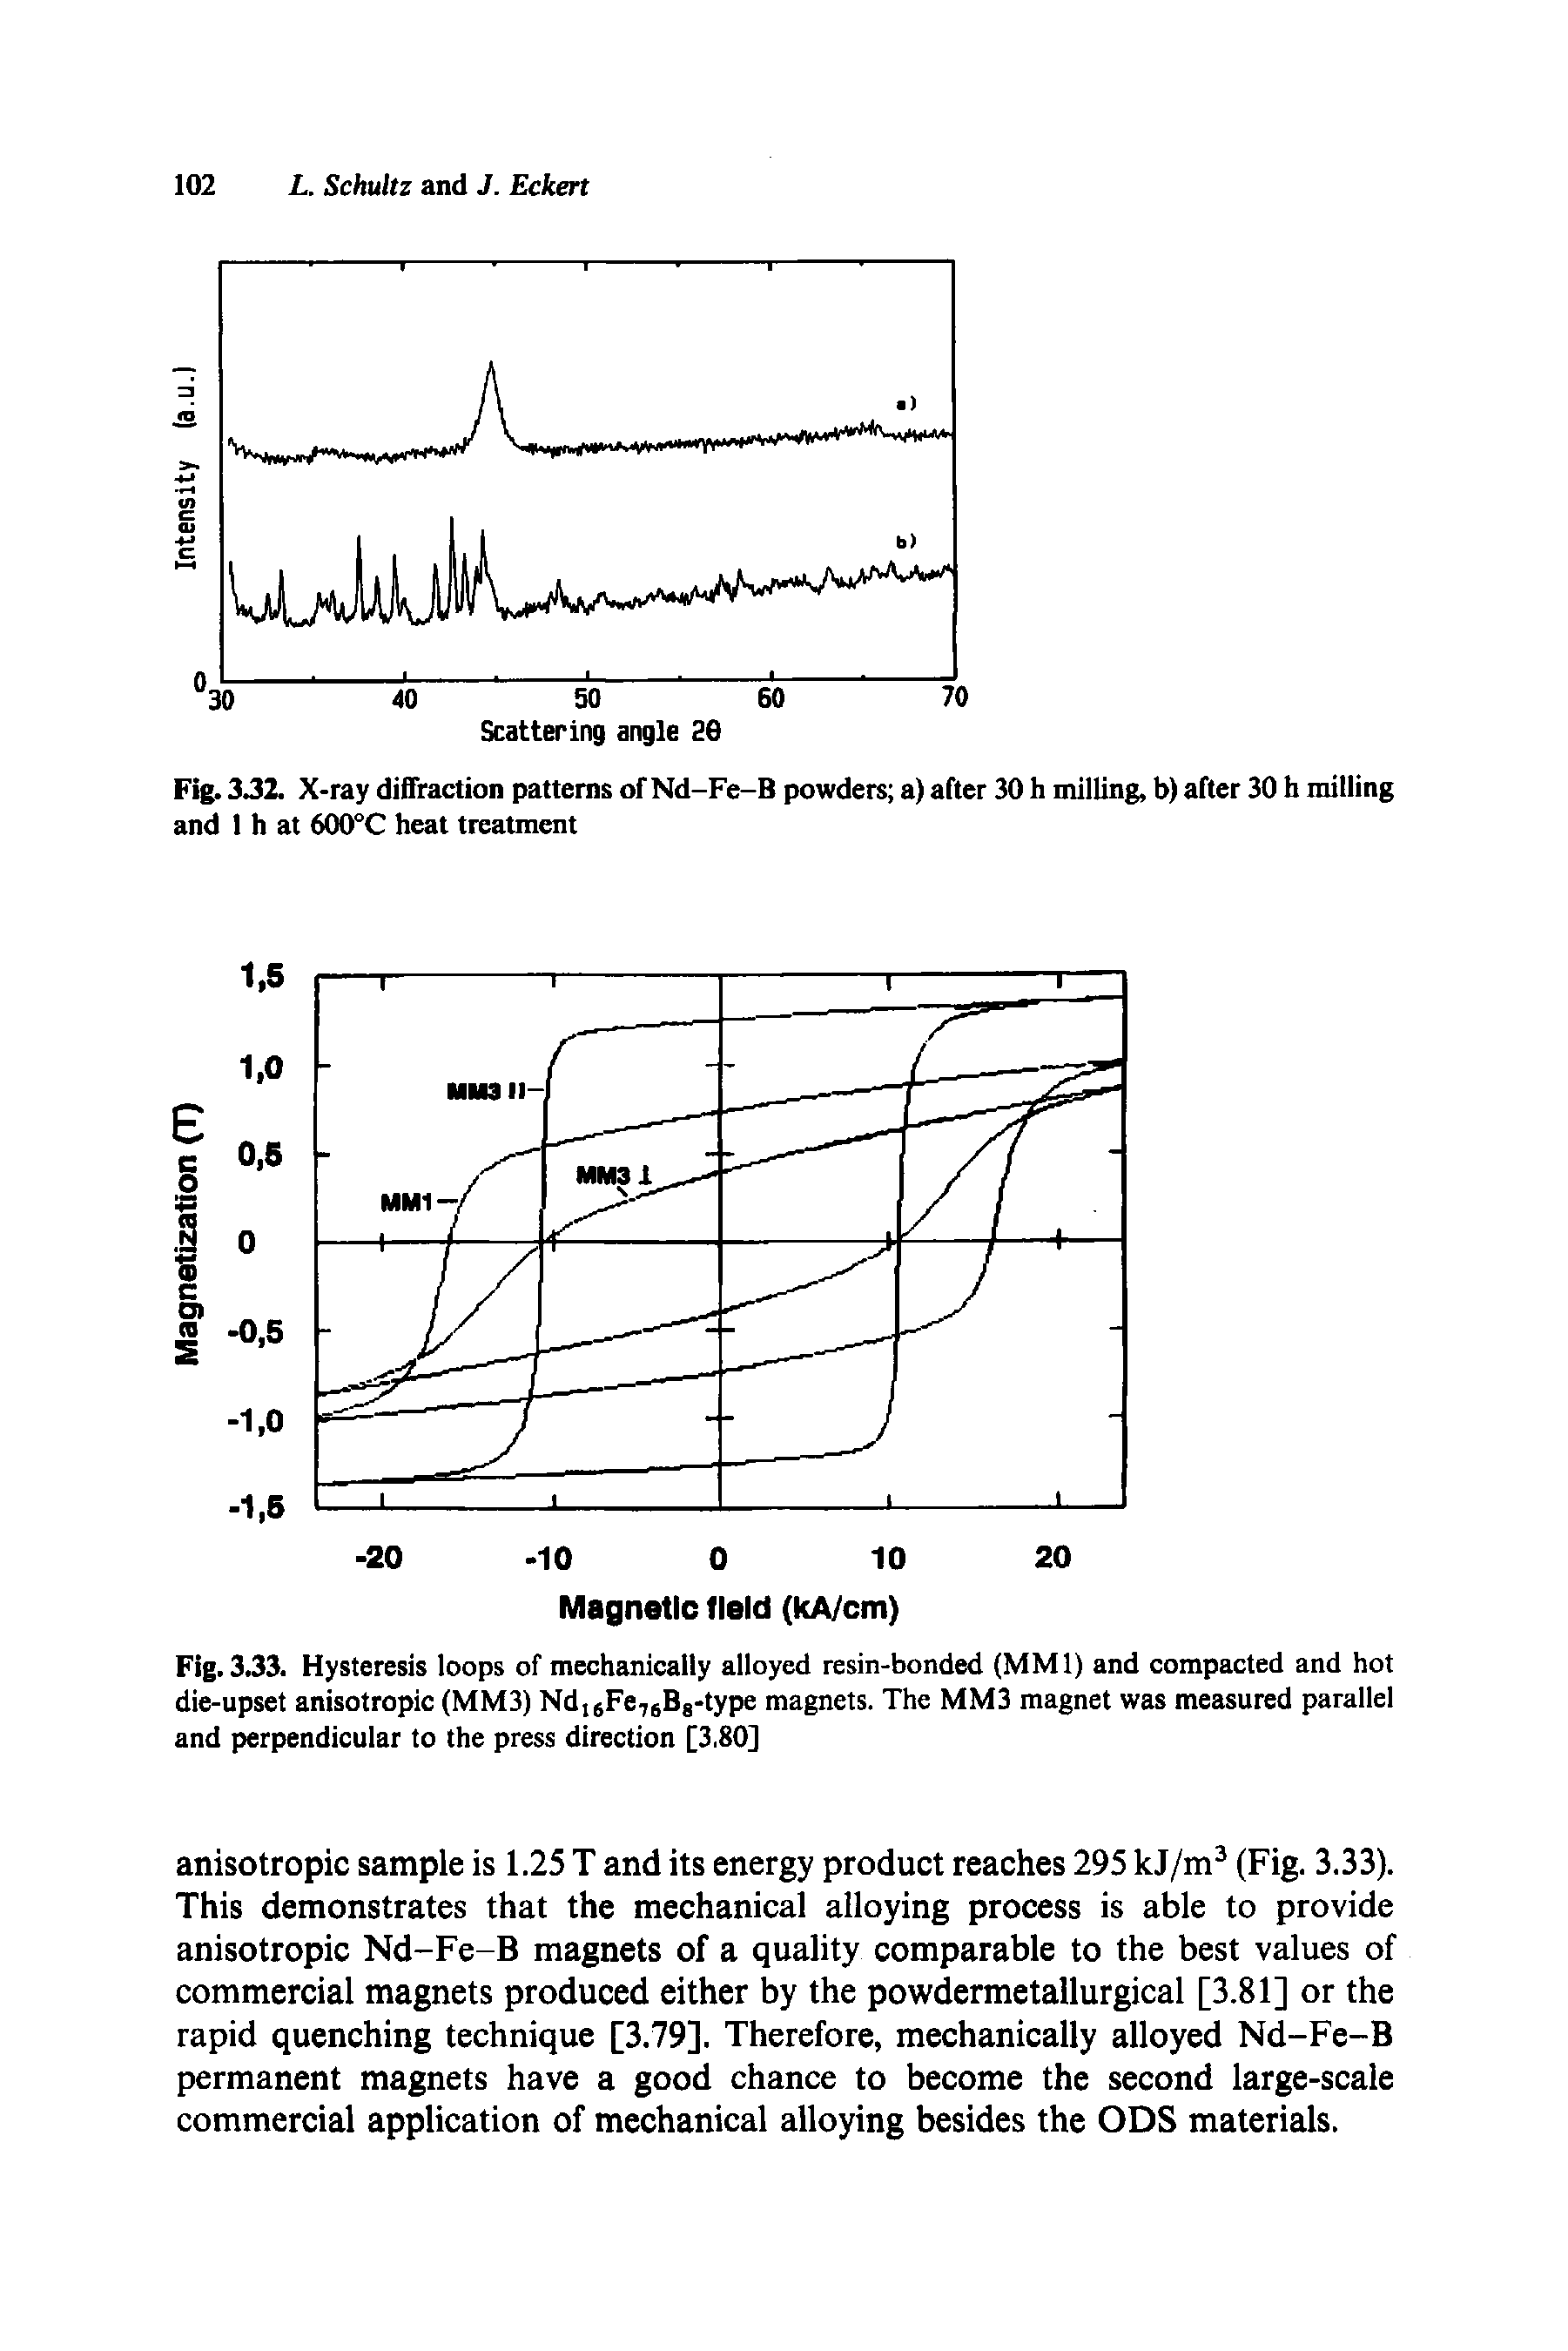 Fig. 3.33. Hysteresis loops of mechanically alloyed resin-bonded (MM1) and compacted and hot die-upset anisotropic (MM3) NdI6Fe76B8-type magnets. The MM3 magnet was measured parallel and perpendicular to the press direction [3.80]...